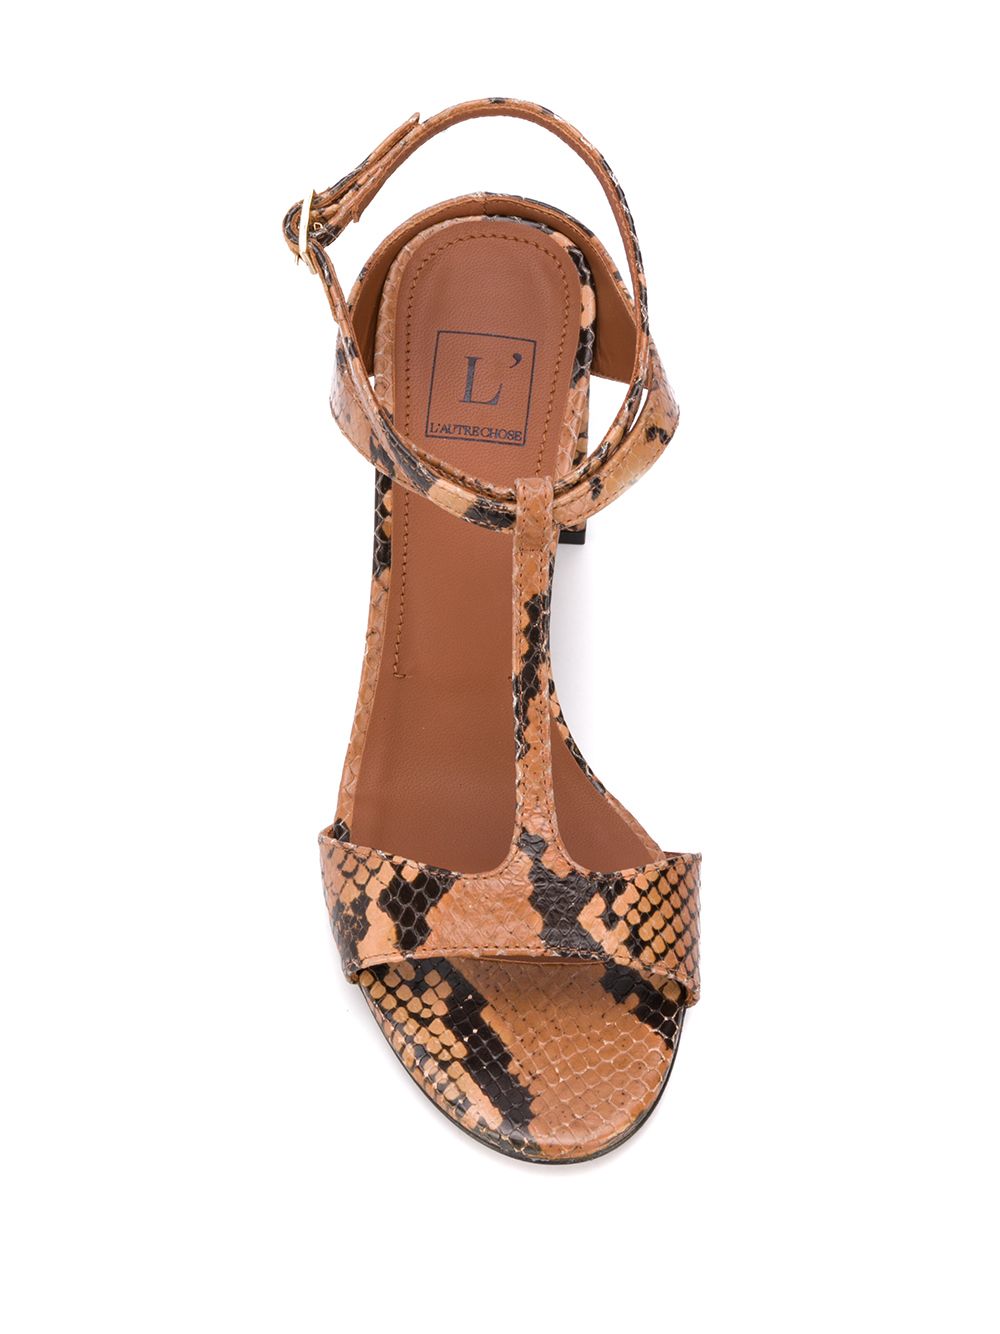 Open Toe Sandals In Cigar Python Print Leather LDL054.95CP29112106 - 5